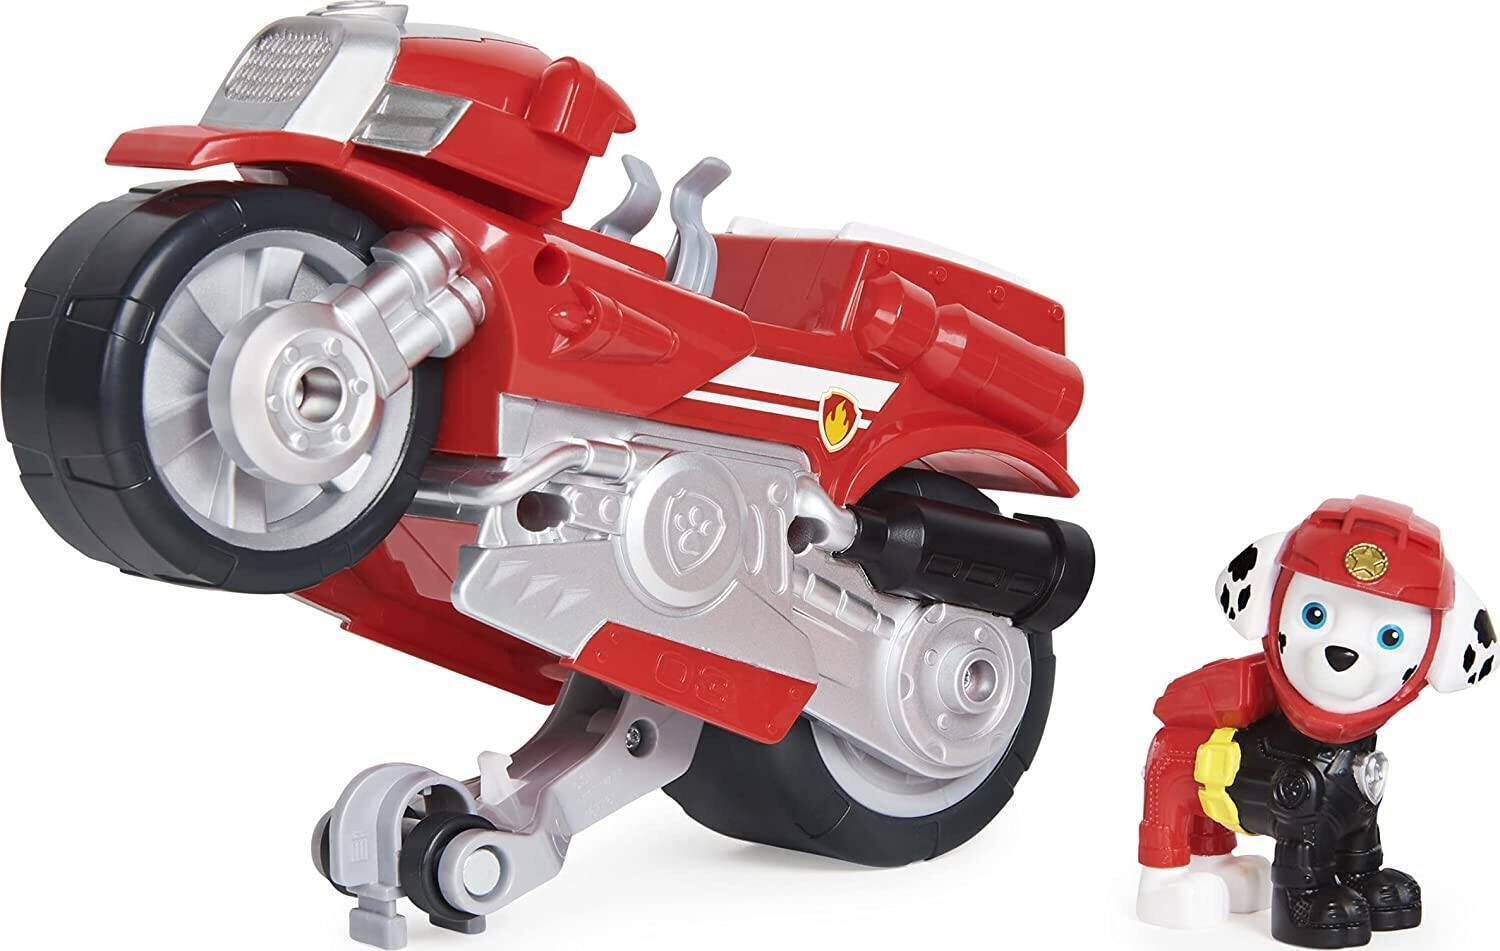 Paw Patrol Moto Pups Marshall’s Deluxe Pull Back Motorcycle w/ Wheelie Feature and Figurine $6 + Free S&H w/ Prime or $25+